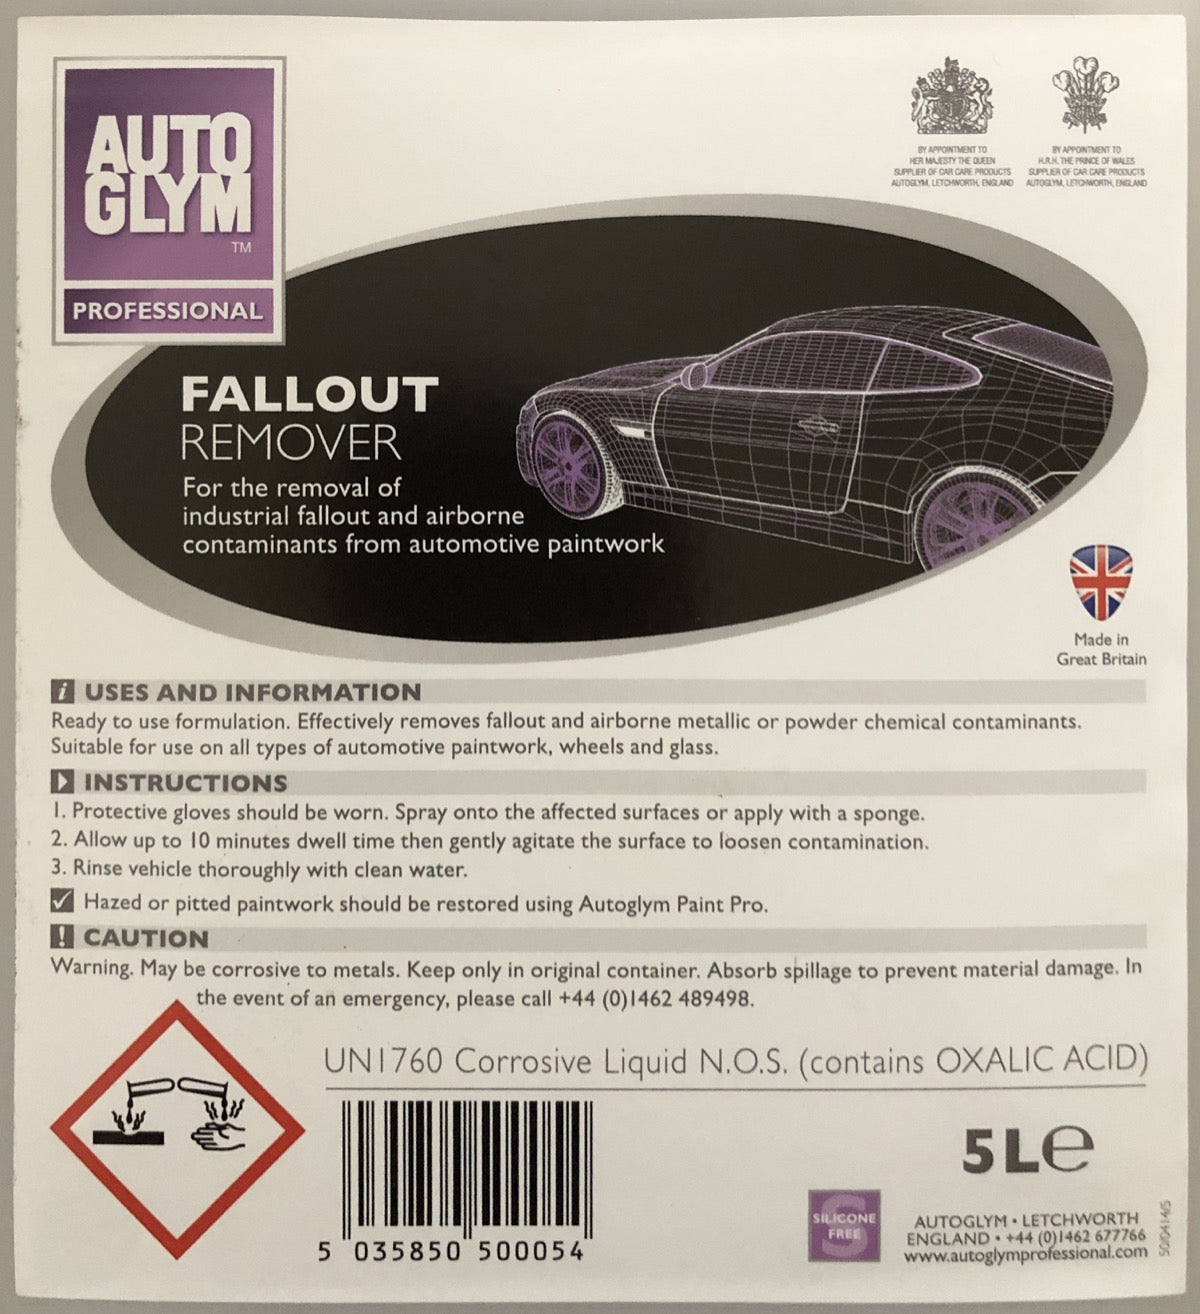 Autoglym Fallout Remover instructions. How to use Autoglym Fall out remover. Autoglym Cork Ireland